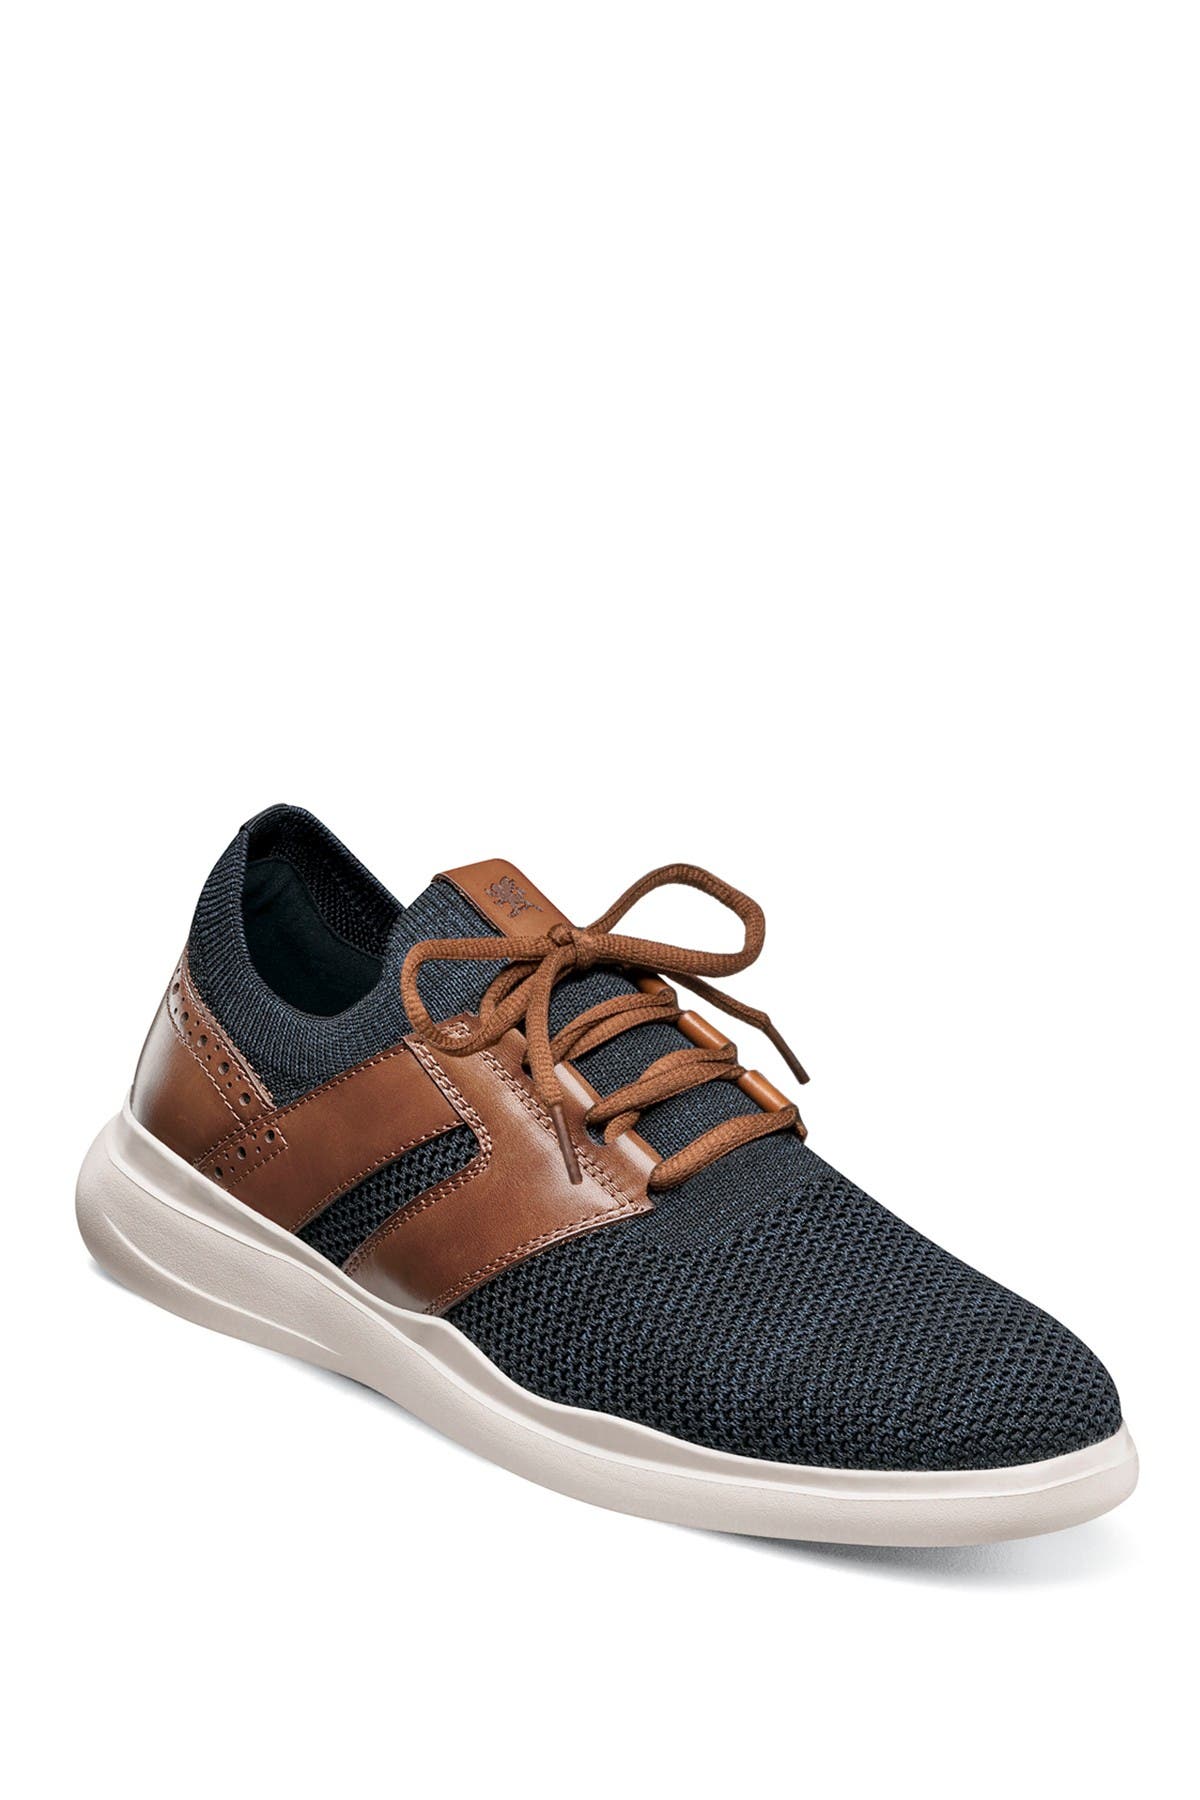 Stacy Adams Moxley Knit Plain Toe Lace-up Sneaker In Navy/cgnac